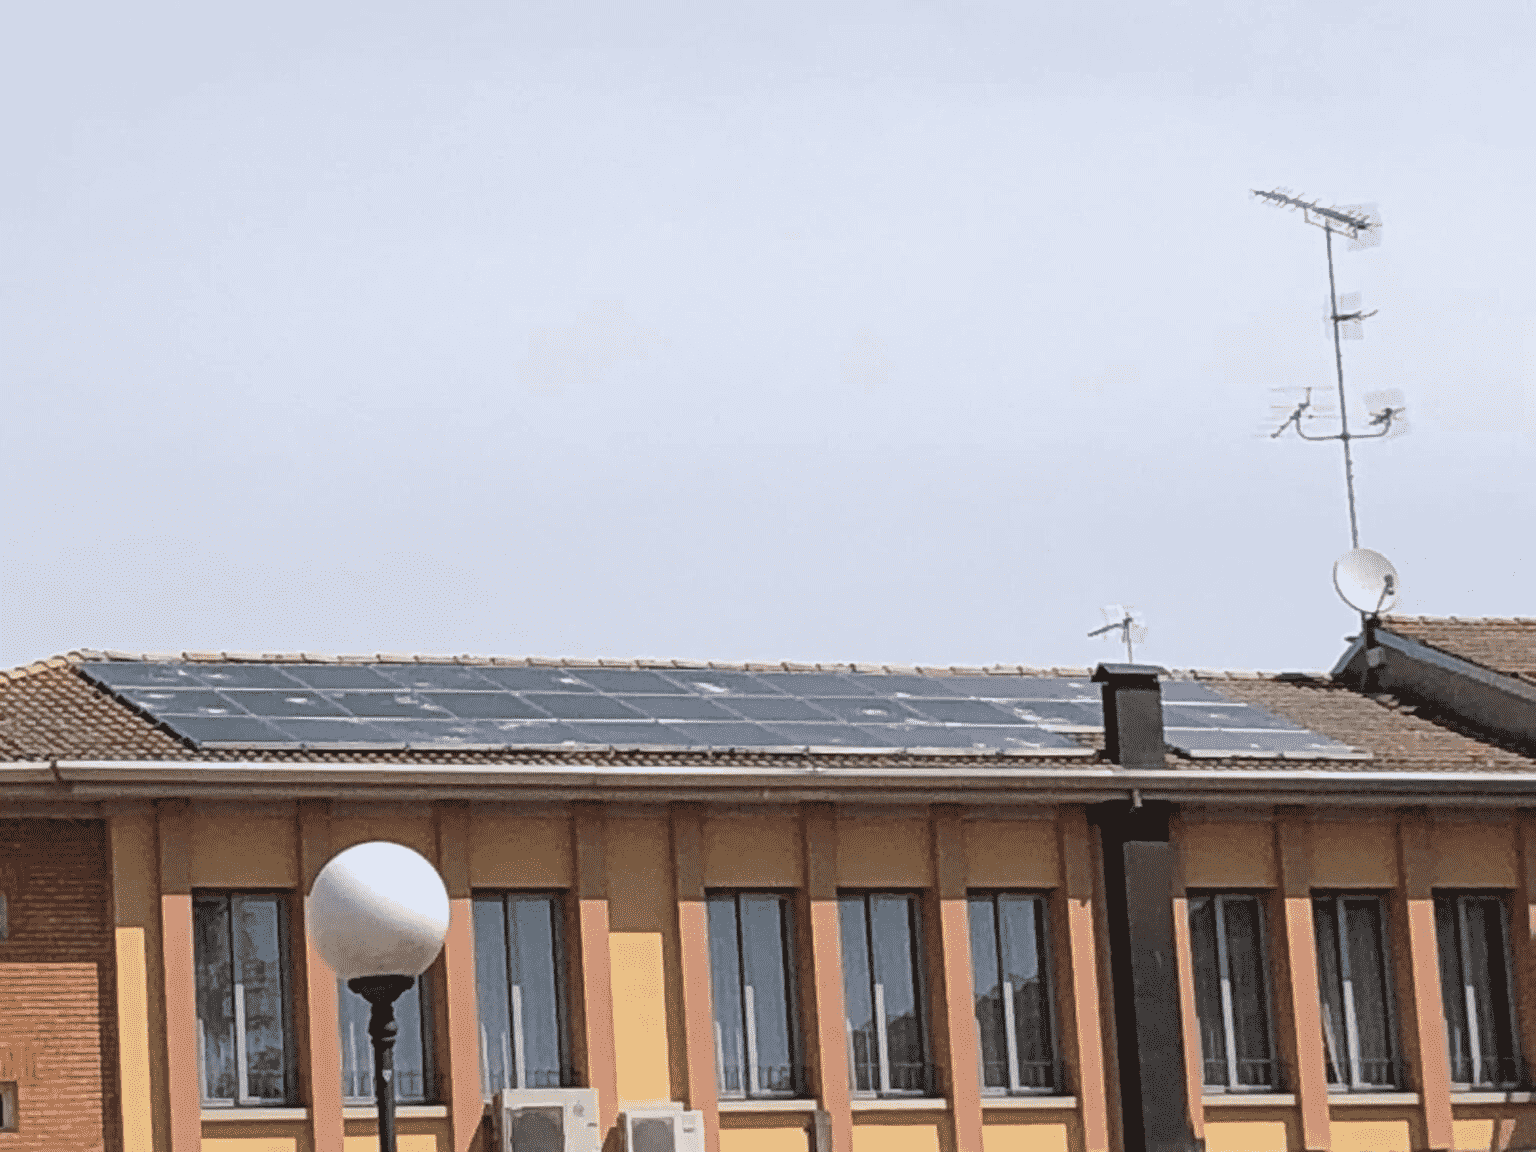 How large a hailstorm can damage a PV system?